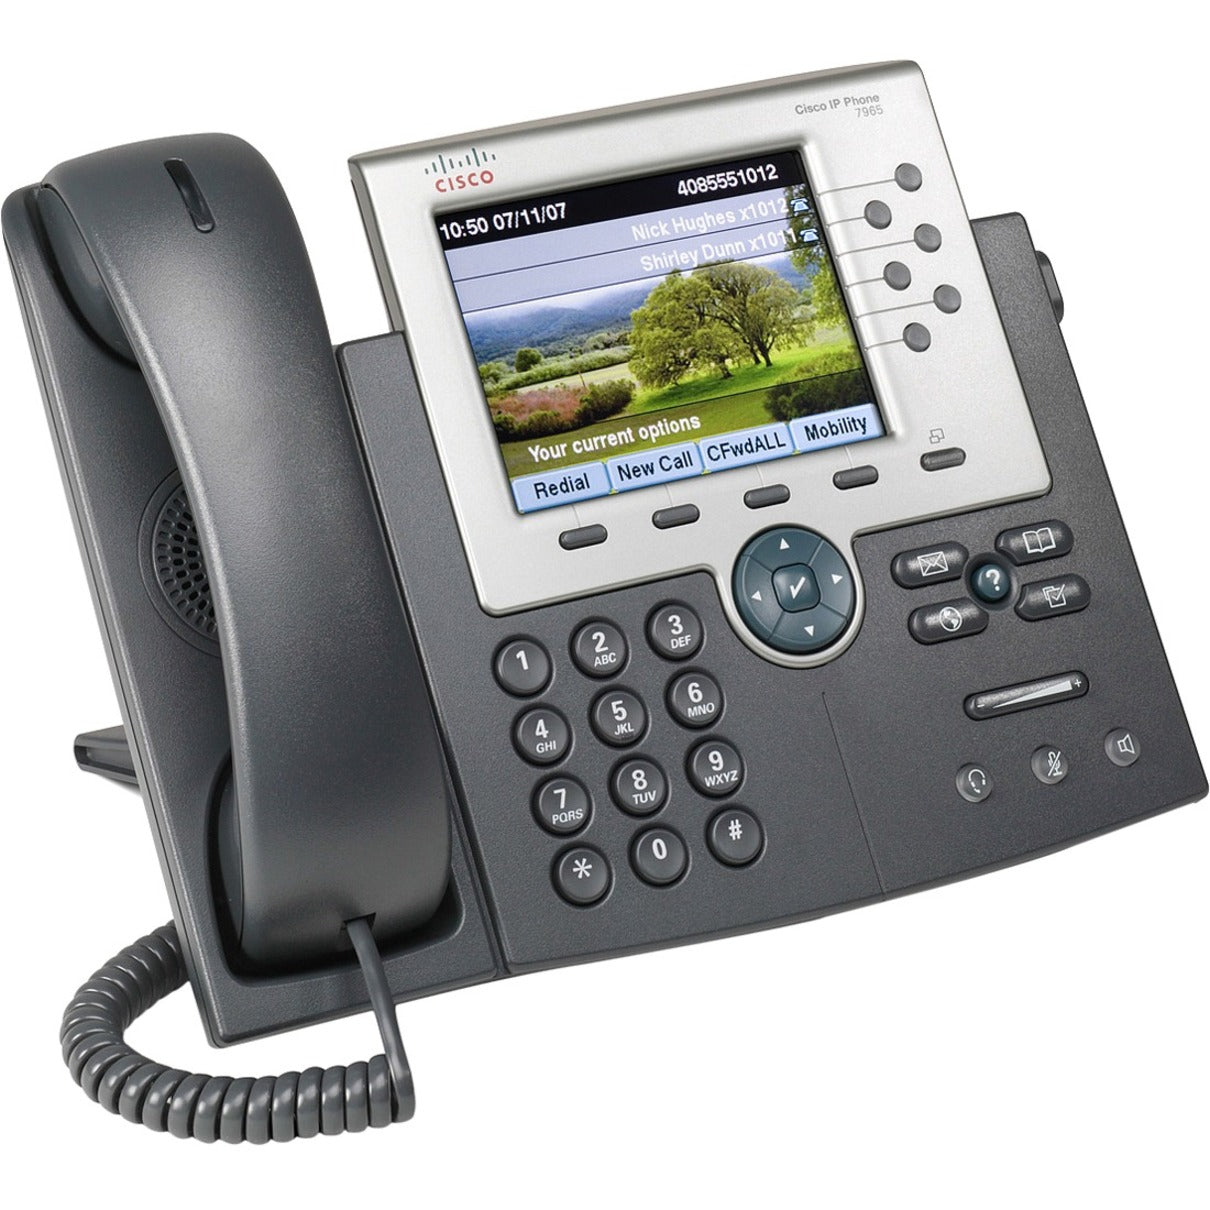 Cisco CP-7965G Unified IP Phone, Color Display, Full-Duplex Speakerphone, PoE Support